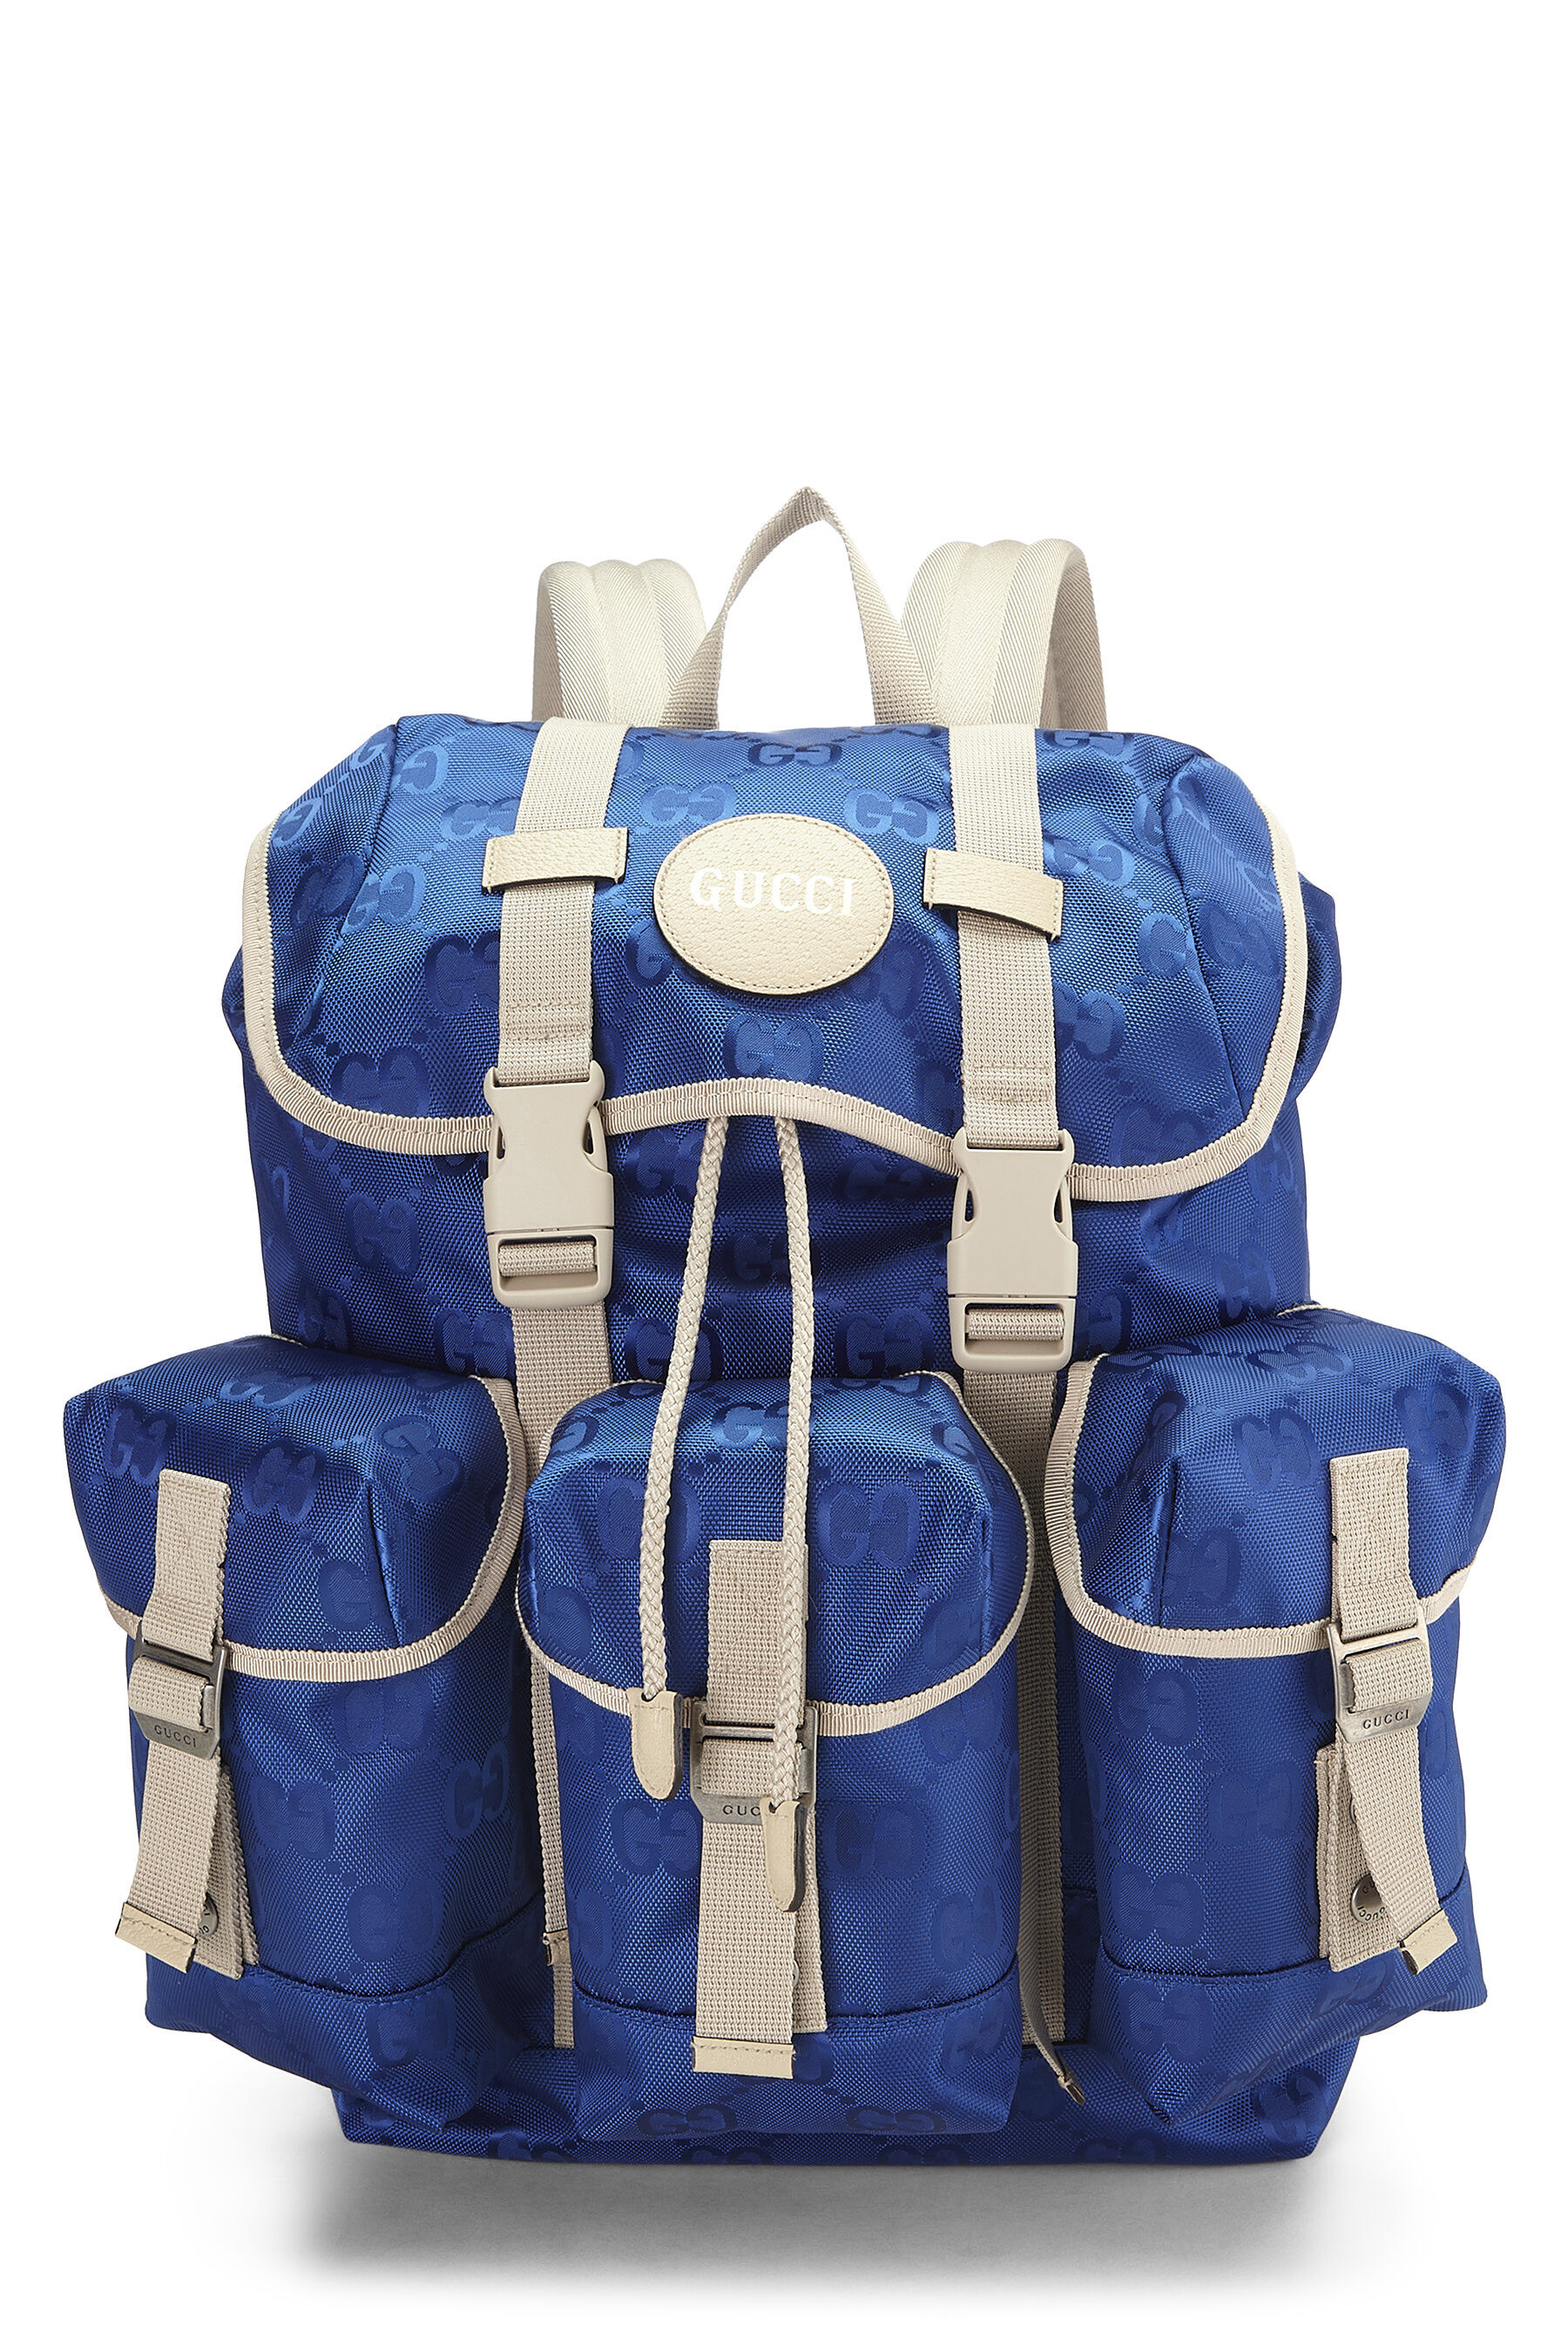 Quited Denim Backpack | The Louis Stewart Collection